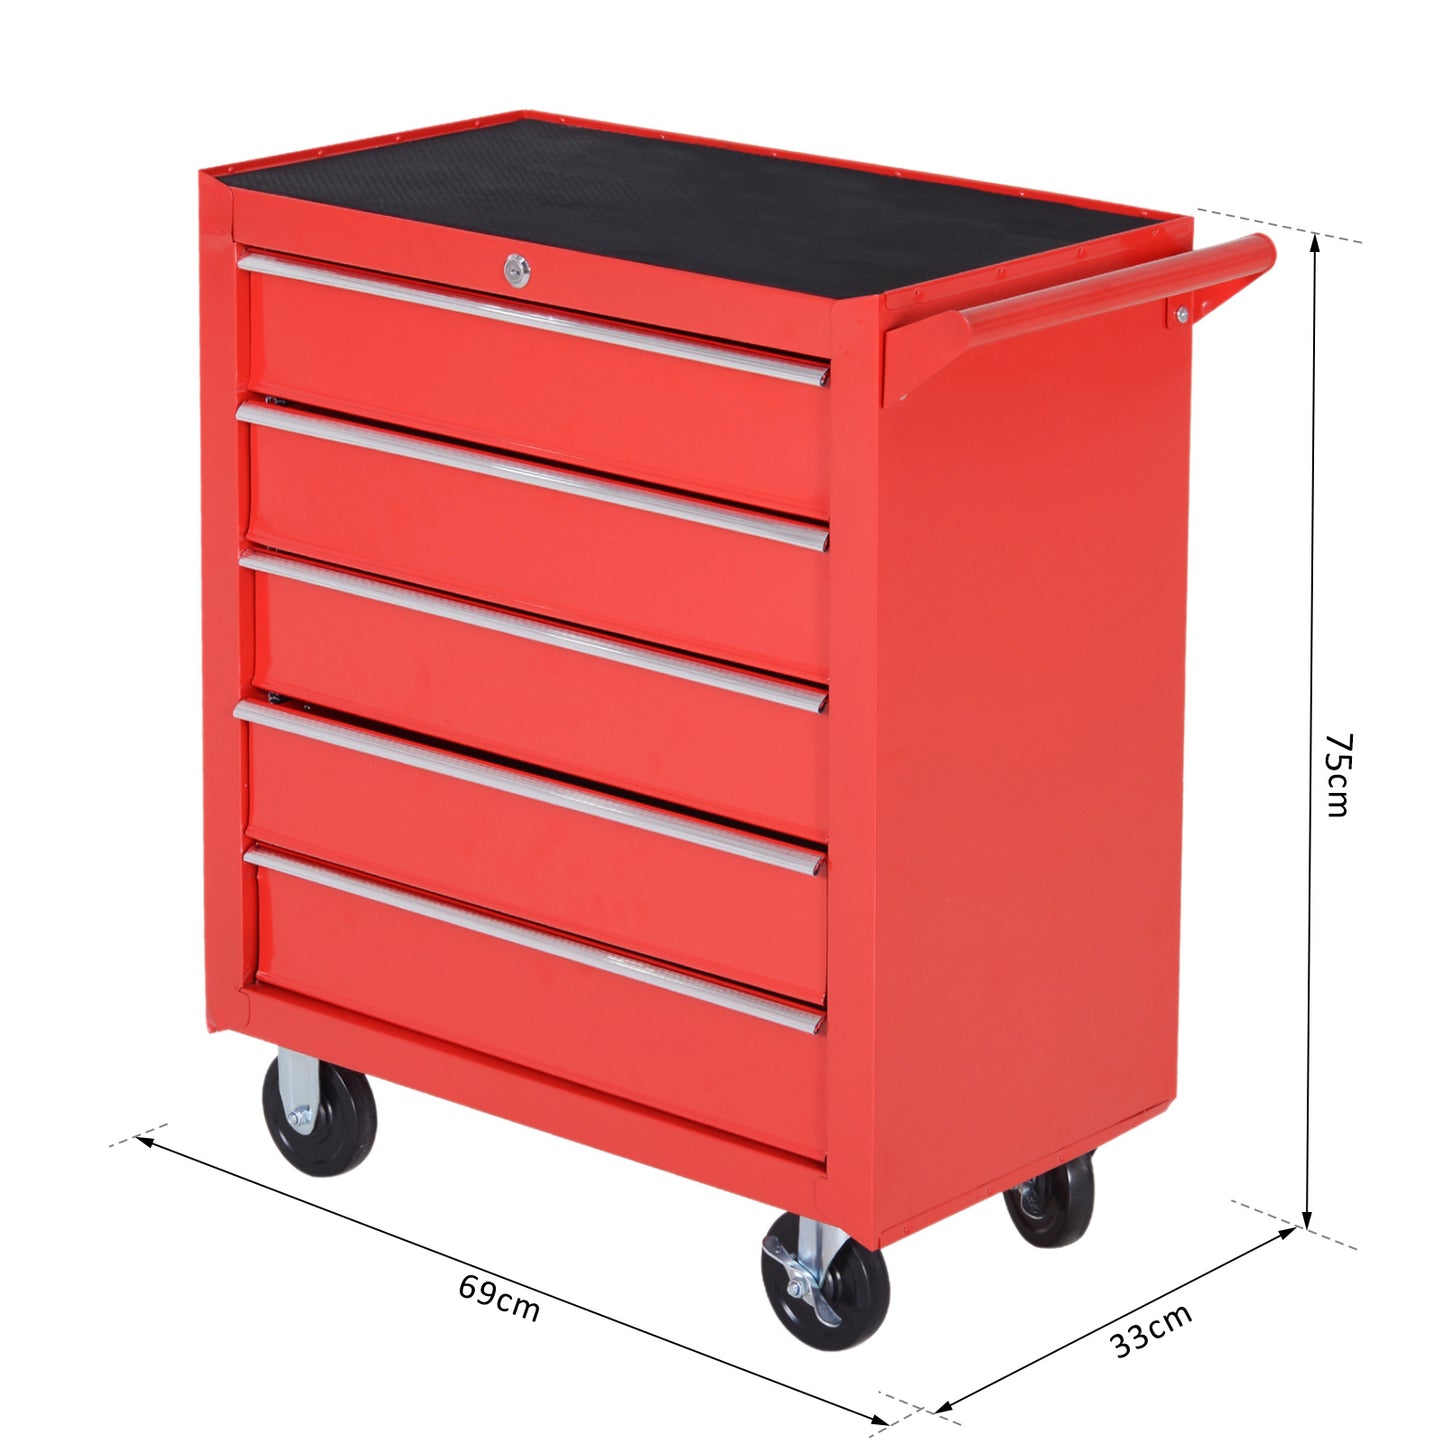 HOMCOM Roller Tool Cabinet, 5 Drawers-Red